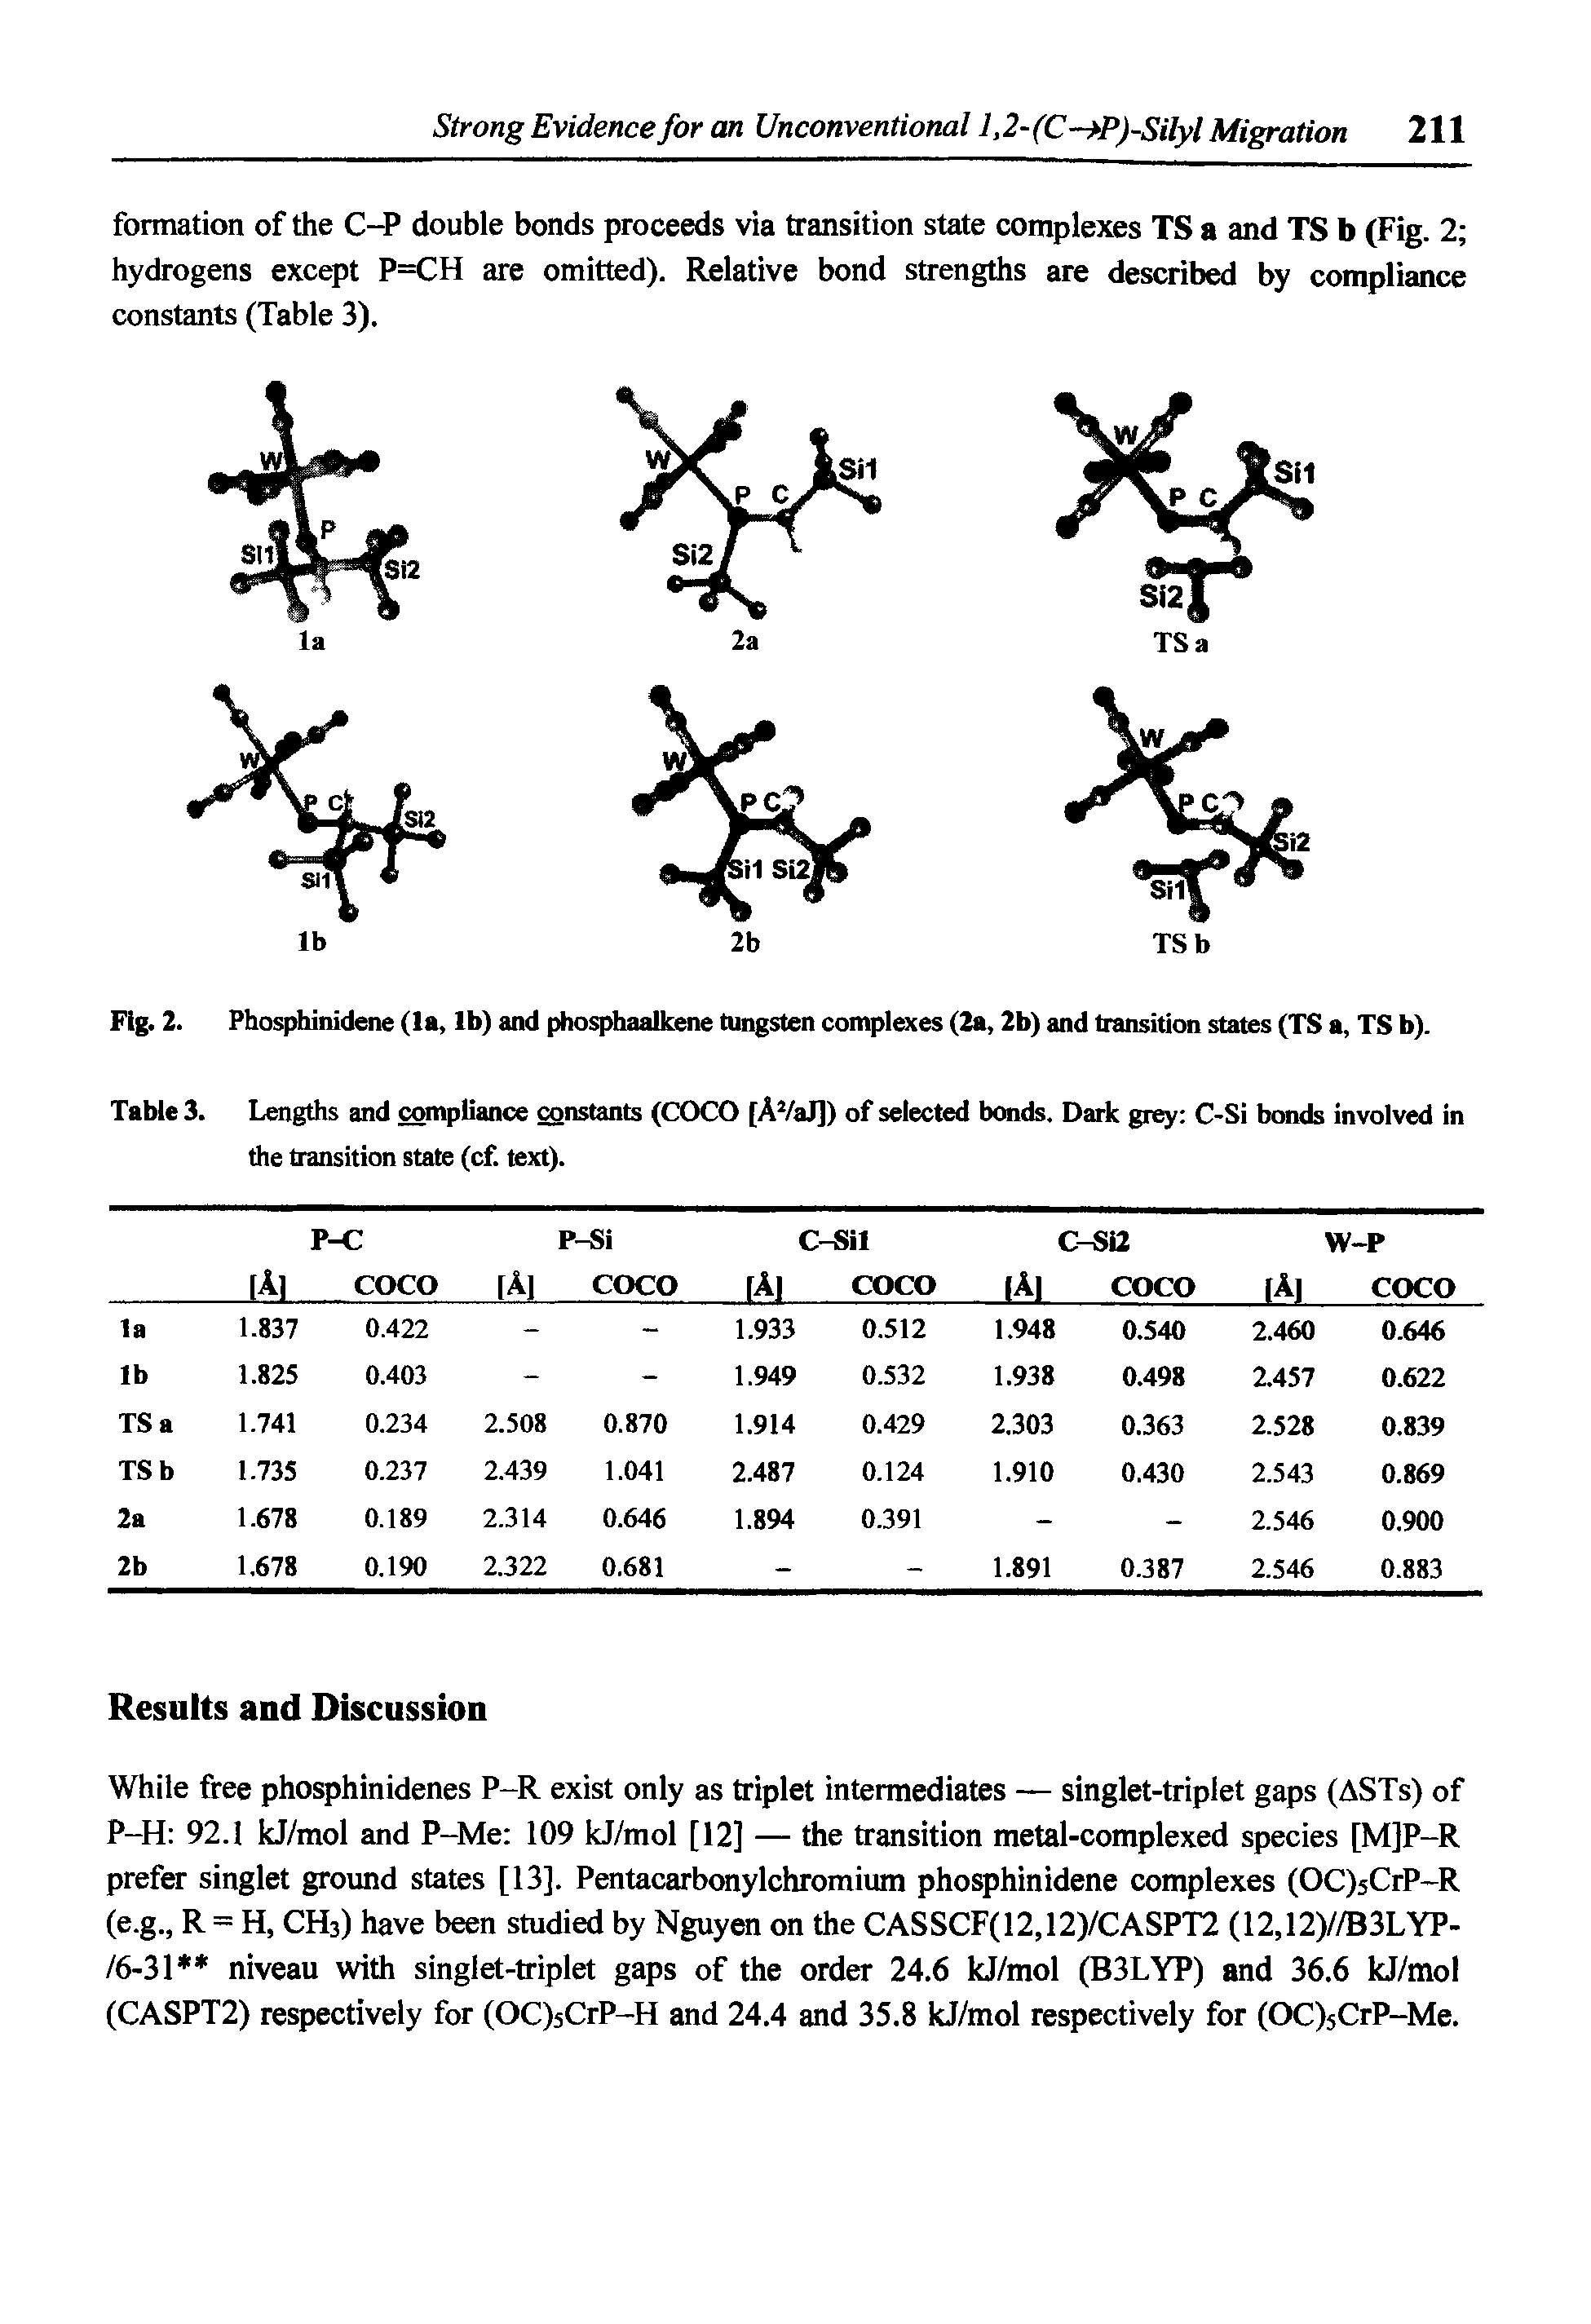 Fig. 2. Phosphinidene (la, lb) and phosphaalkene tungsten complexes (2a, 2b) and transition states (TS a, TS b).